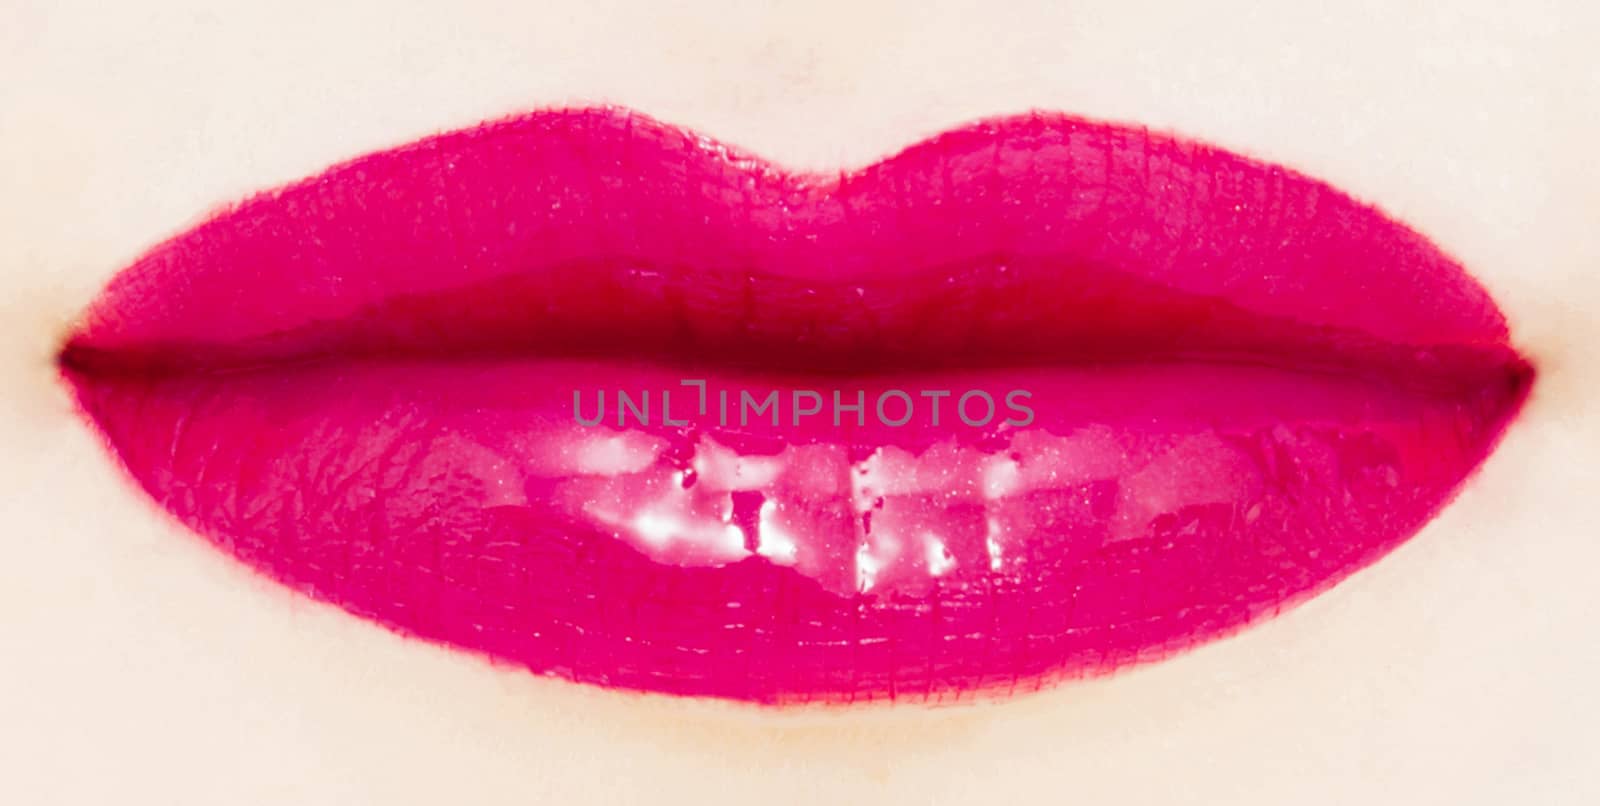 Female lips with glossy lipstick or lip gloss for make-up and beauty ads